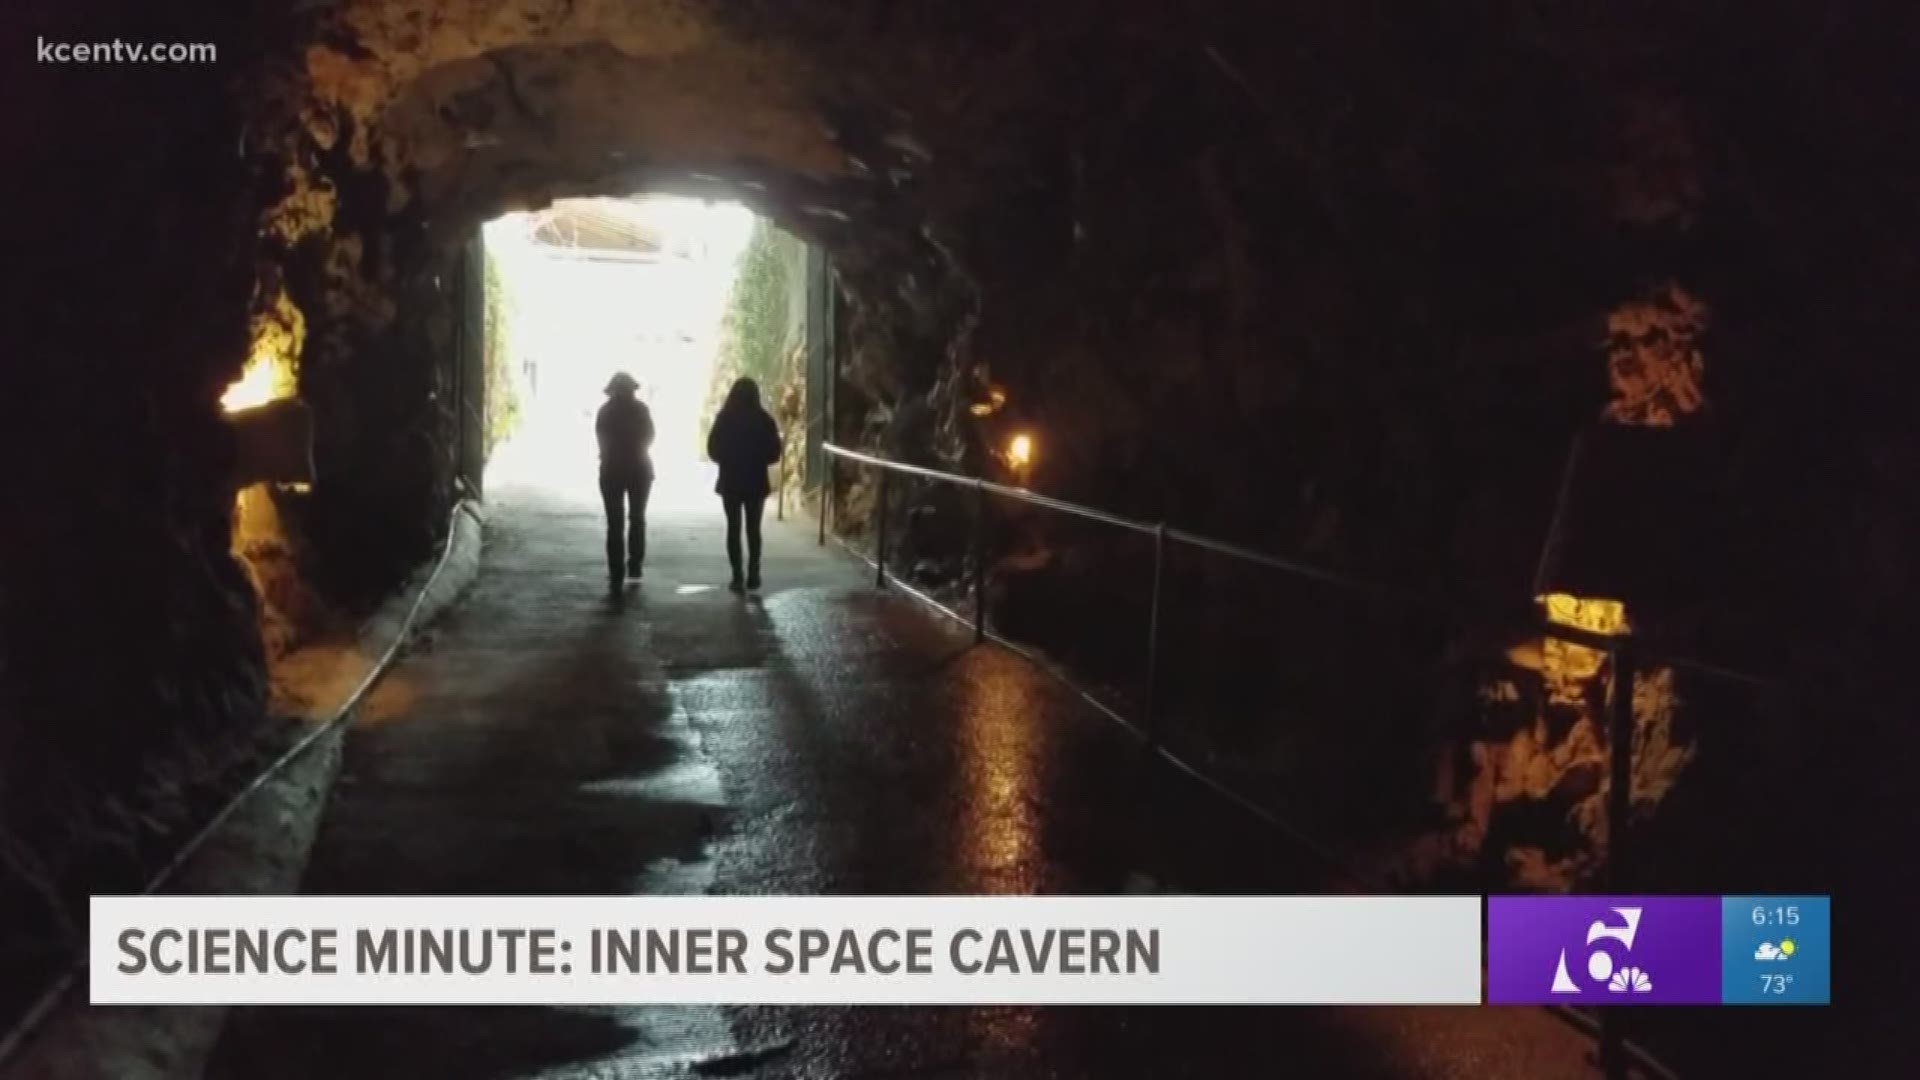 Channel 6 meteorologist Meagan Massey checks out the Inner Space Cavern, a Central Texas destination full of history.